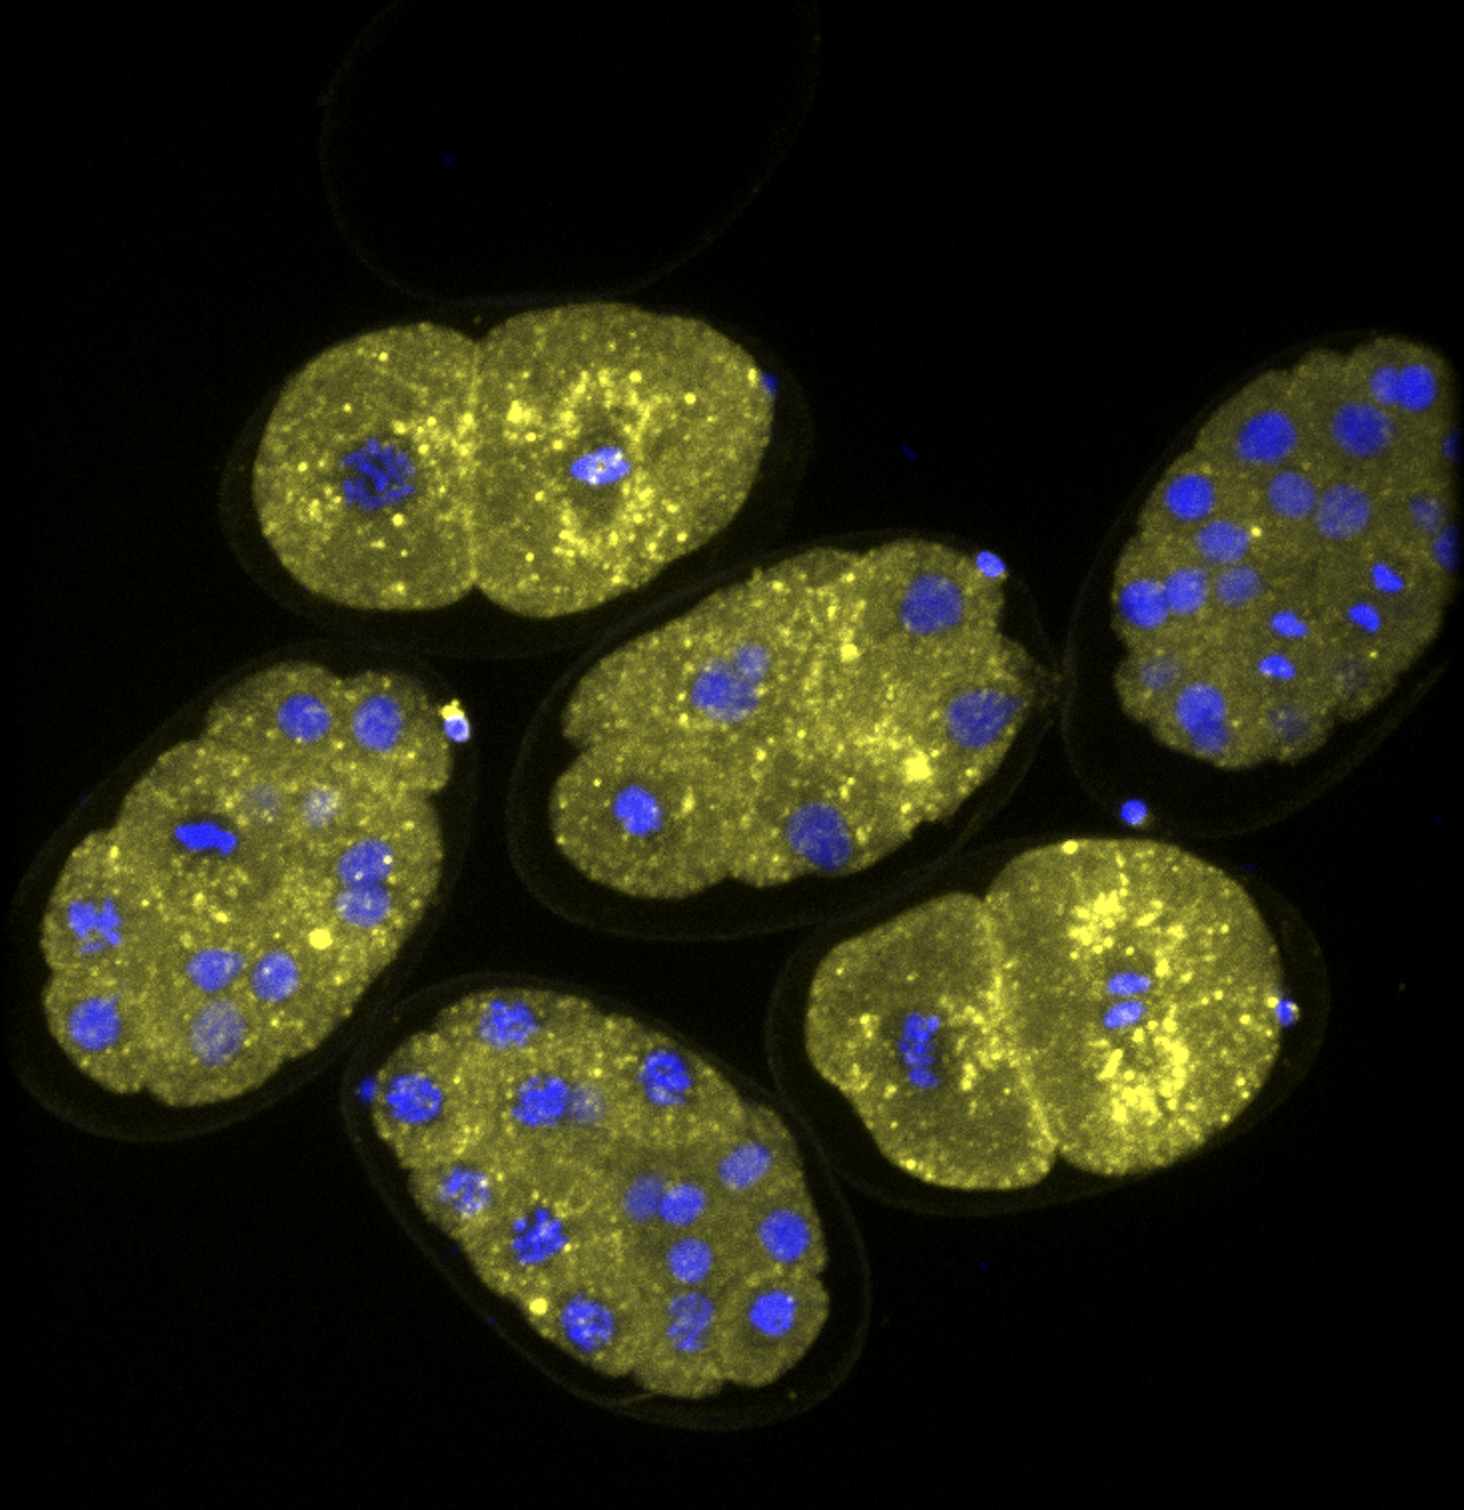 FLARE staining of early embryos